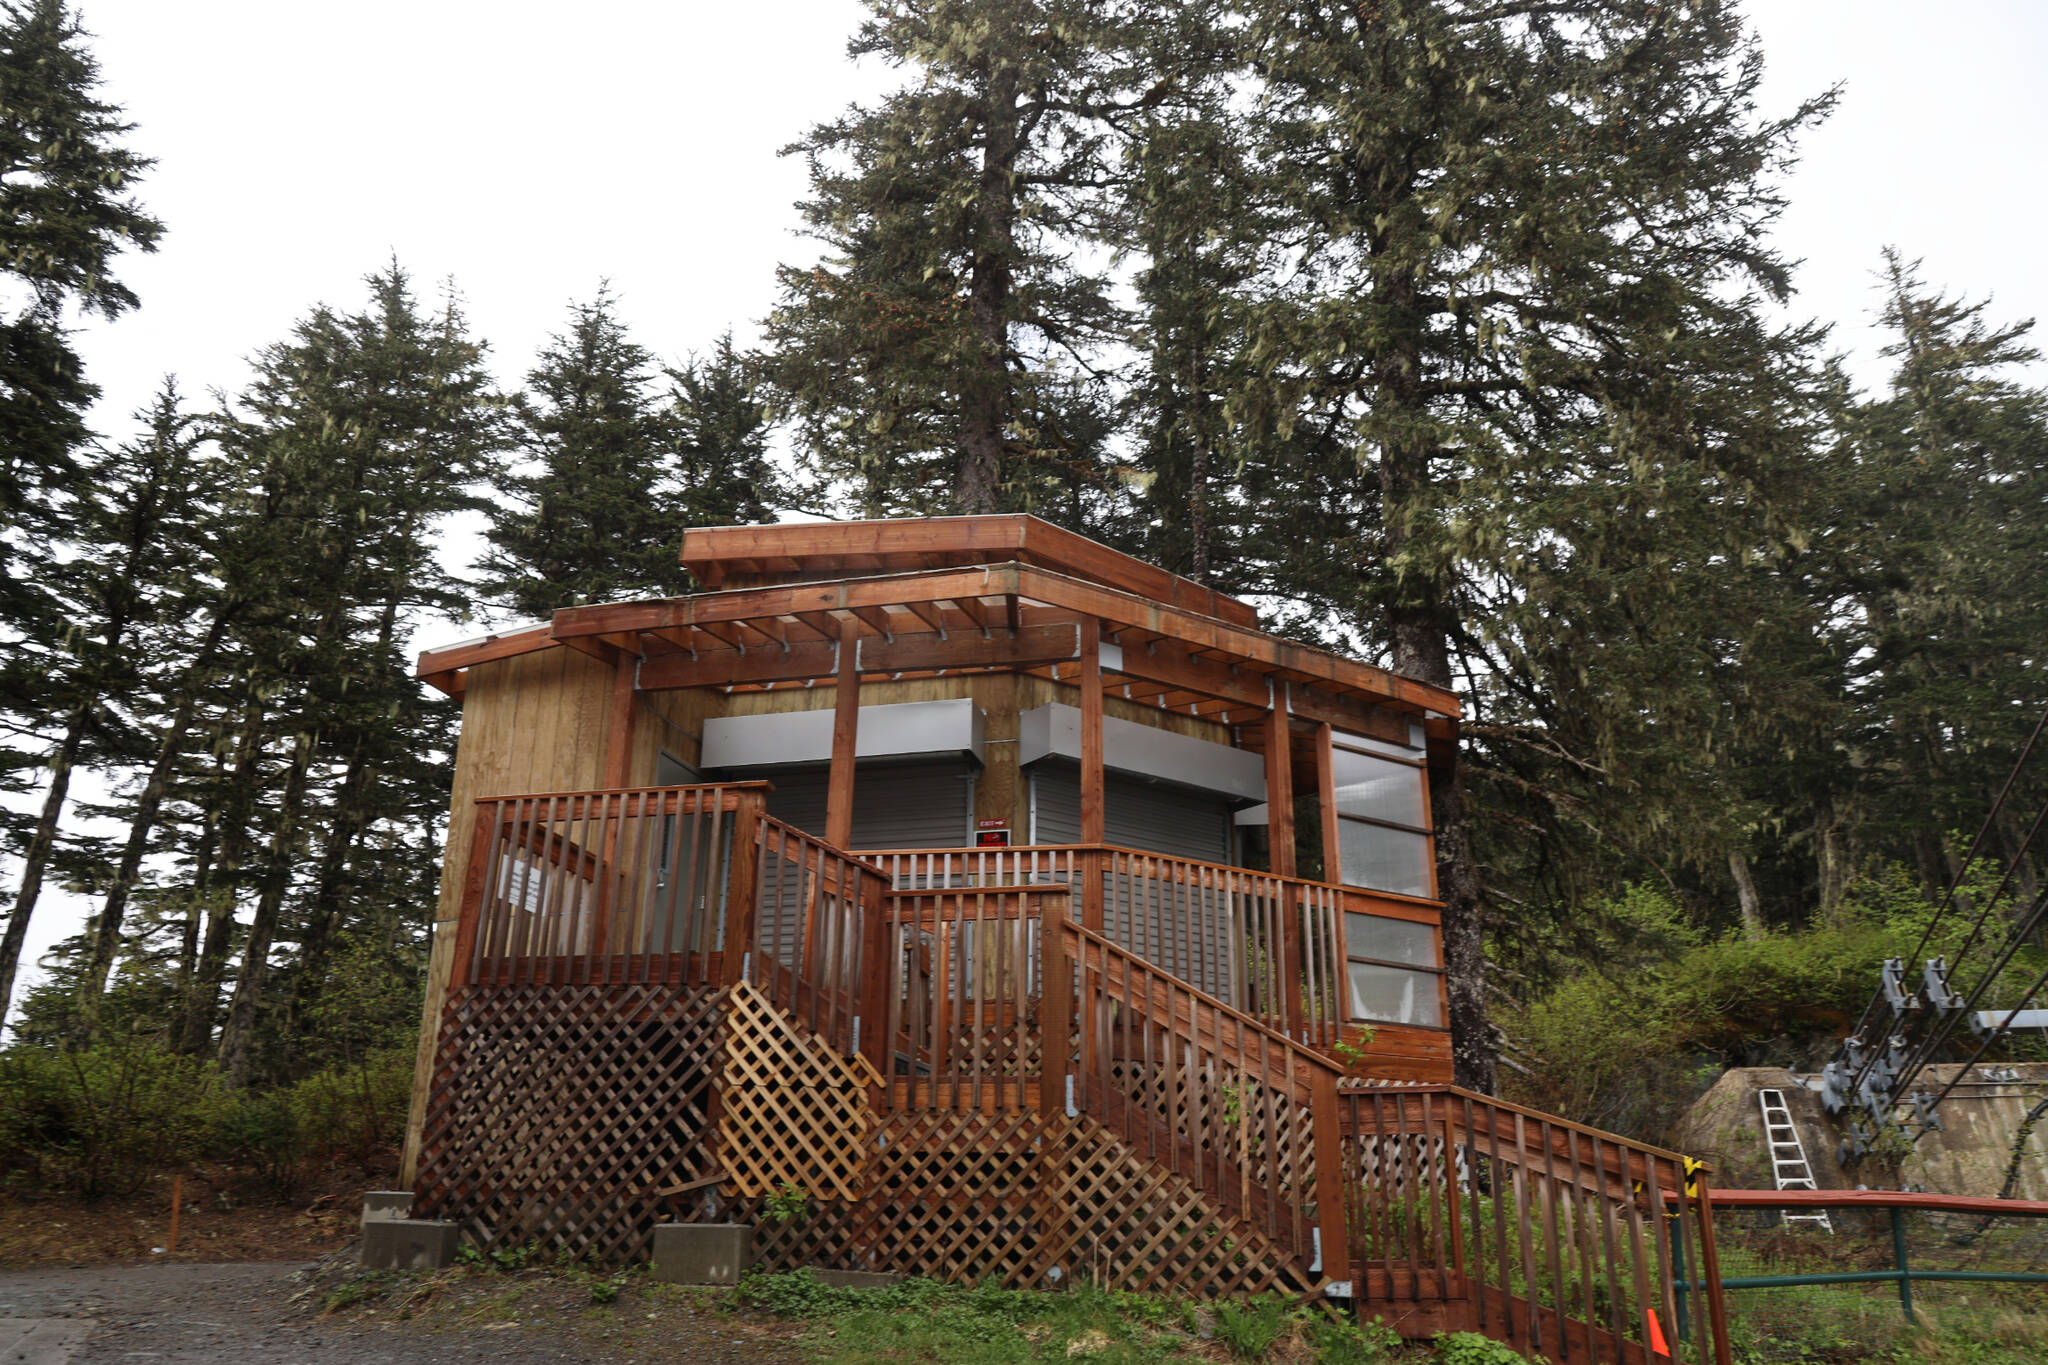 The wildlife shelter at the top of Mount Roberts sits empty Friday morning. The building future remains in limbo as it is owned by the Juneau Raptor Center, which this fall announced it would be suspending its operations by the end of 2023. (Clarise Larson / Juneau Empire)